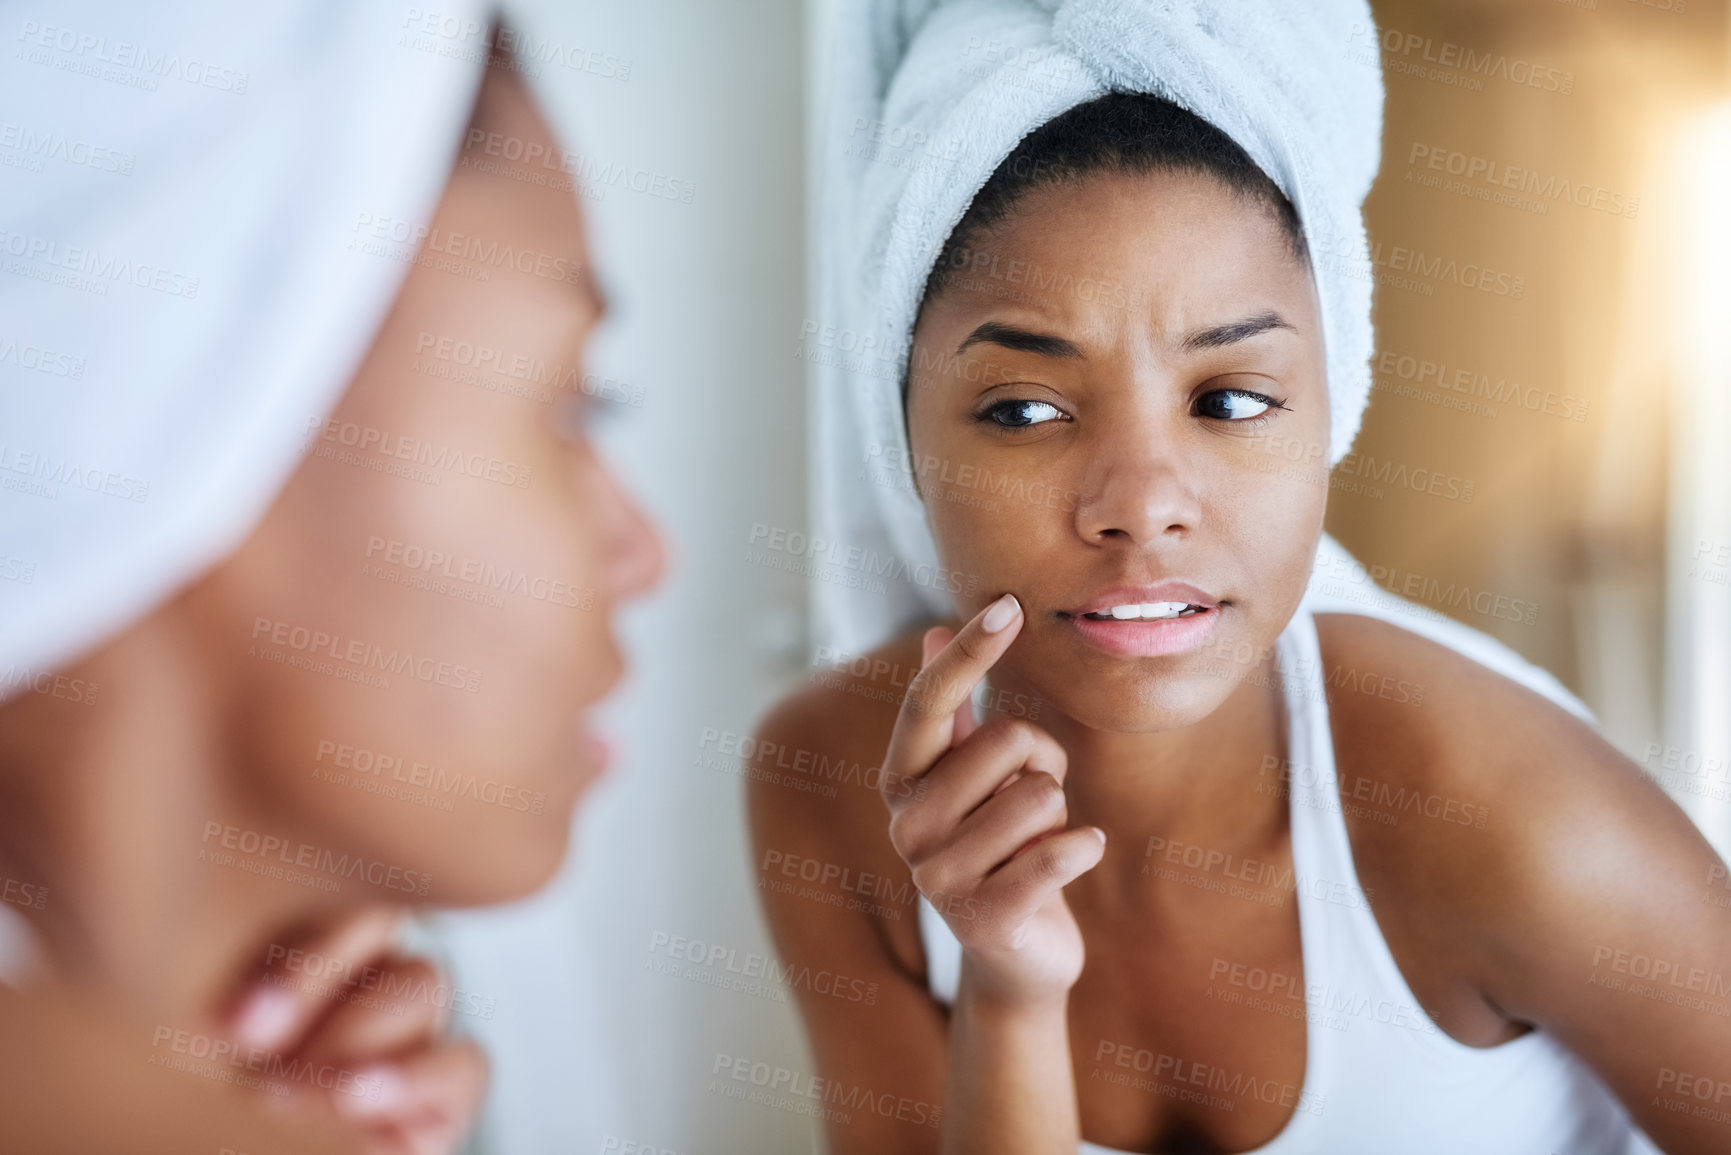 Buy stock photo Shot of a young woman inspecting her skin in front of the bathroom mirror and looking upset